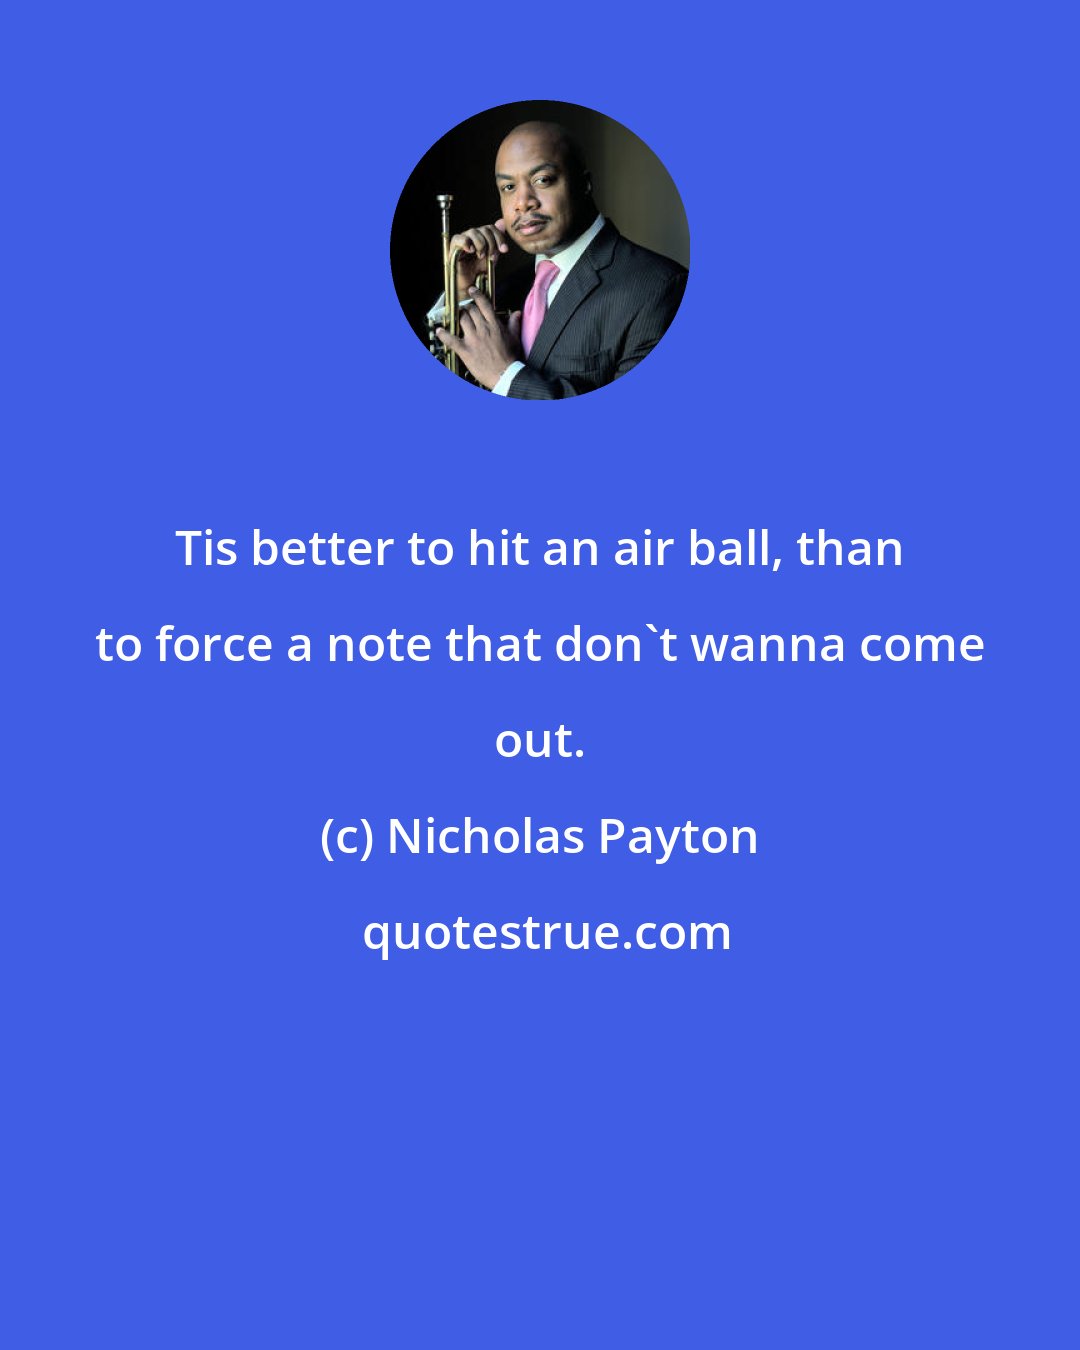 Nicholas Payton: Tis better to hit an air ball, than to force a note that don't wanna come out.